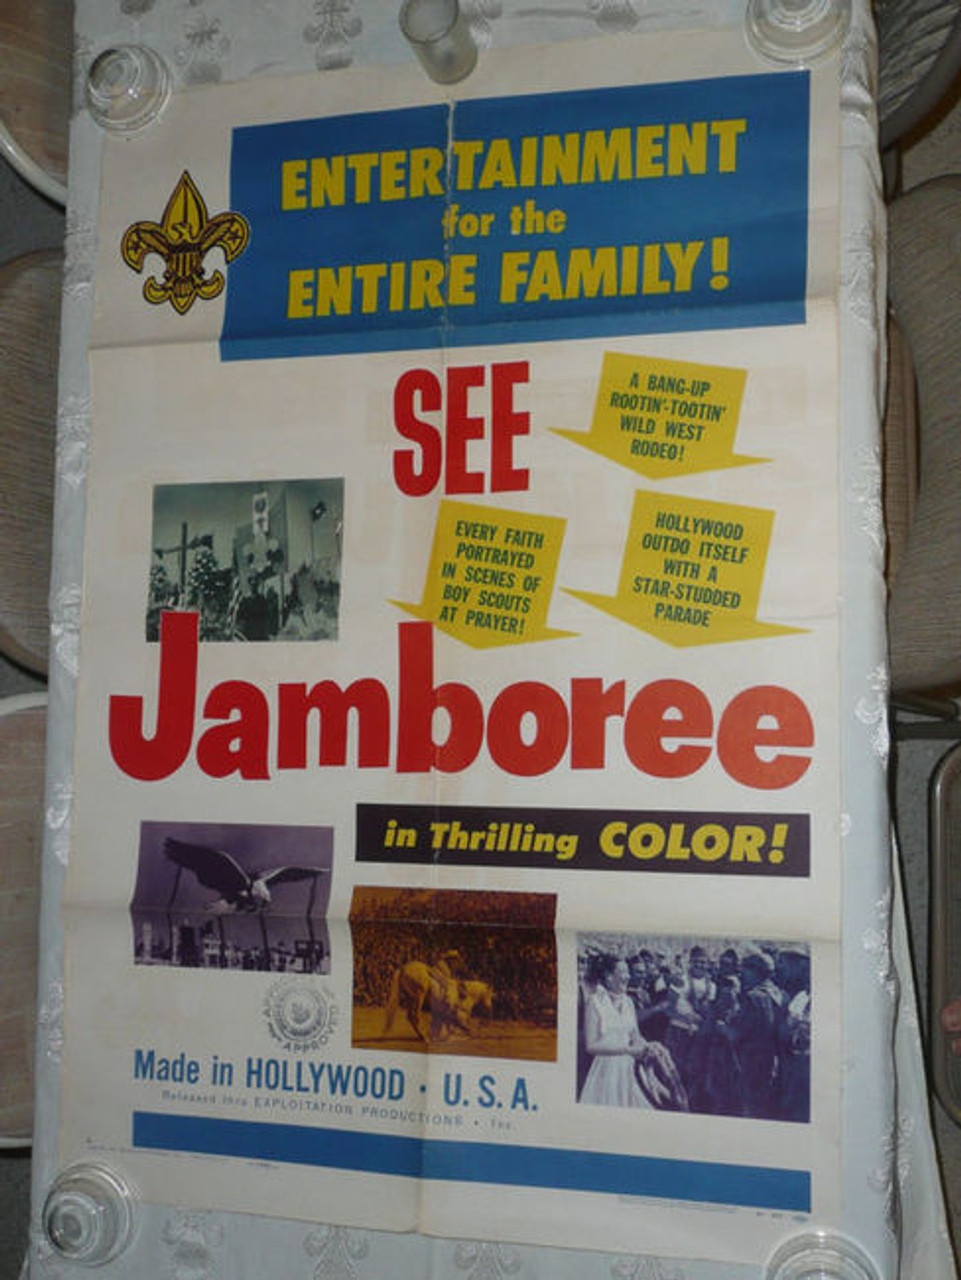 RARE 1953 Boy Scout National Jamboree Poster Promoting Jamboree Film, seam tears and other tears that may not be visible in images, should frame well with work